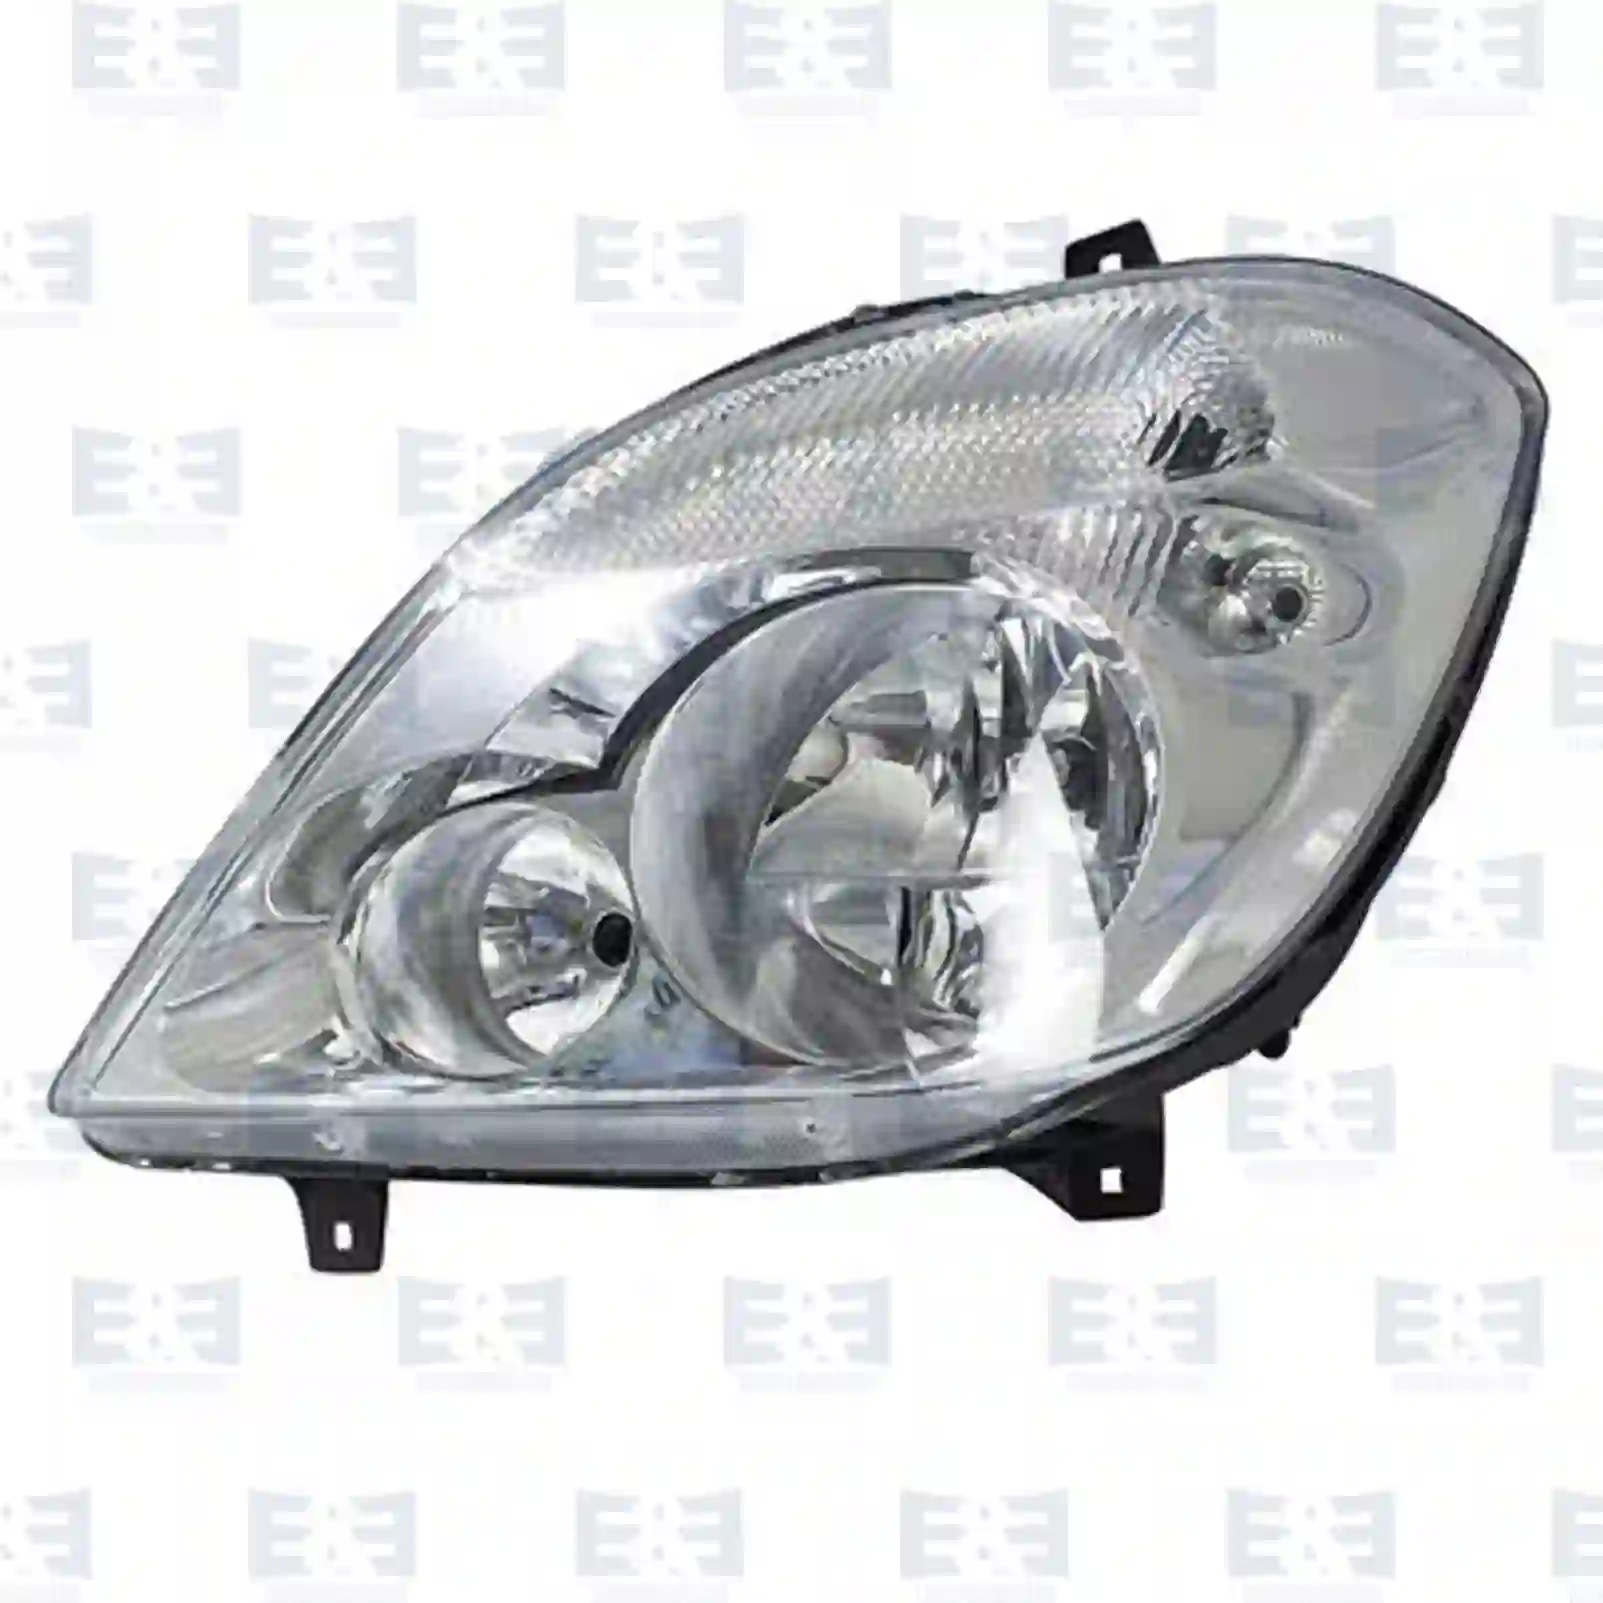 Headlamp, left, without bulbs, with fog lamp, 2E2298087, 9068200561, , , , , , , ||  2E2298087 E&E Truck Spare Parts | Truck Spare Parts, Auotomotive Spare Parts Headlamp, left, without bulbs, with fog lamp, 2E2298087, 9068200561, , , , , , , ||  2E2298087 E&E Truck Spare Parts | Truck Spare Parts, Auotomotive Spare Parts